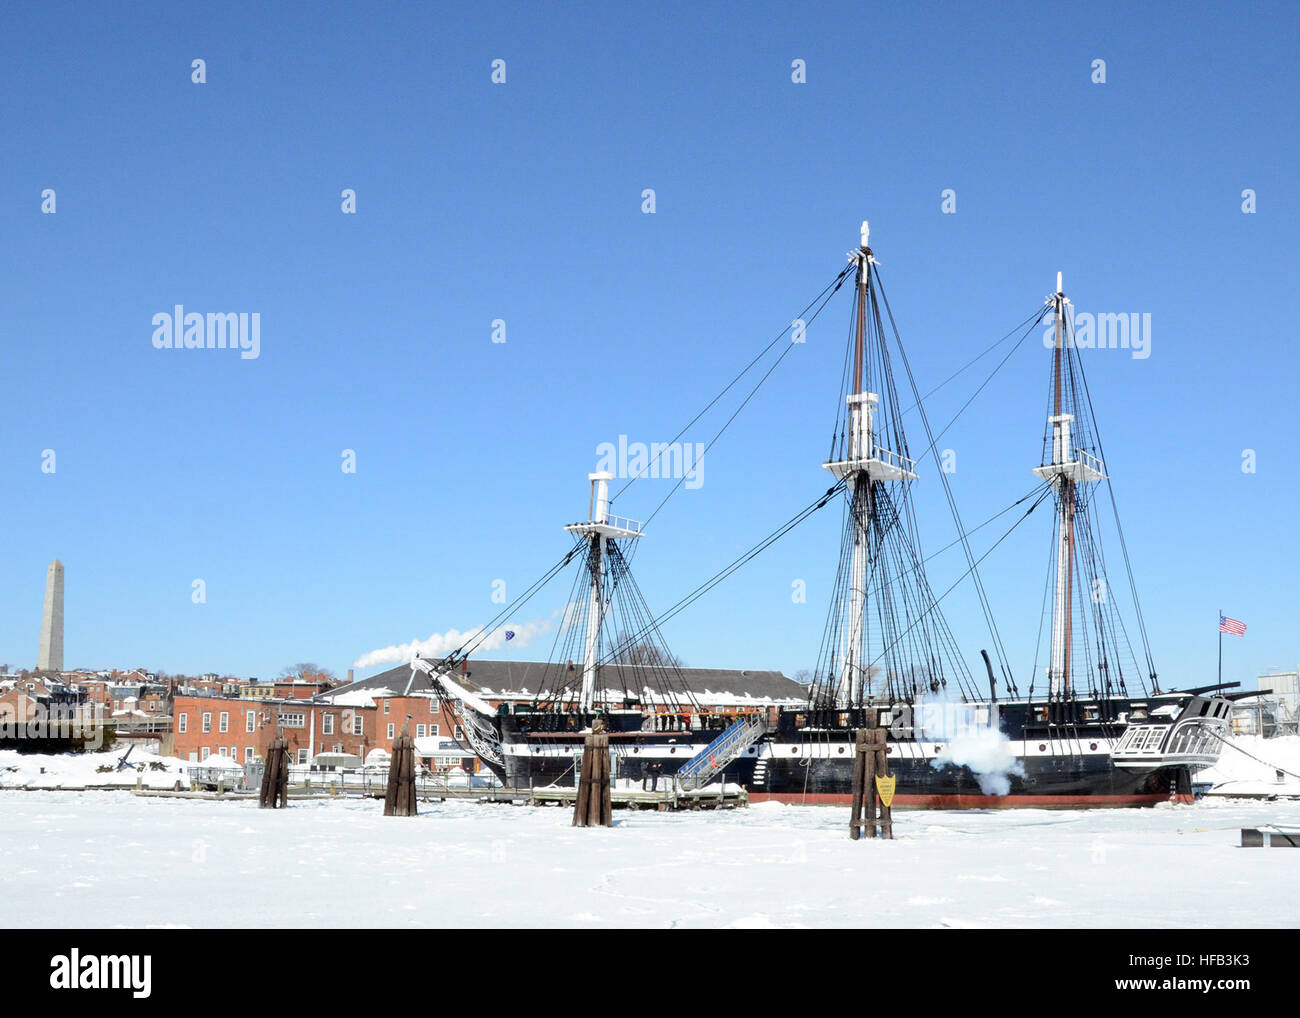 150220-N-SU274-029 CHARLESTOWN, Mass. (Feb. 20, 2015) Sailors assigned to USS Constitution fire a round from the ship's saluting battery to commemorate the bicentennial anniversary of Old Ironsides' dual victory against the Royal Navy ships HMS Cyane and HMS Levant in her final battle of the War of 1812. The battle, which took place on Feb. 20, 1815 near the Portuguese archipelago of Madeira, was fought three days after the stateside ratification of the Treaty of Ghent, which officially ended the war. (U.S. Navy photo by Mass Communication Specialist 2nd Class Peter Melkus/Released) Commemorat Stock Photo